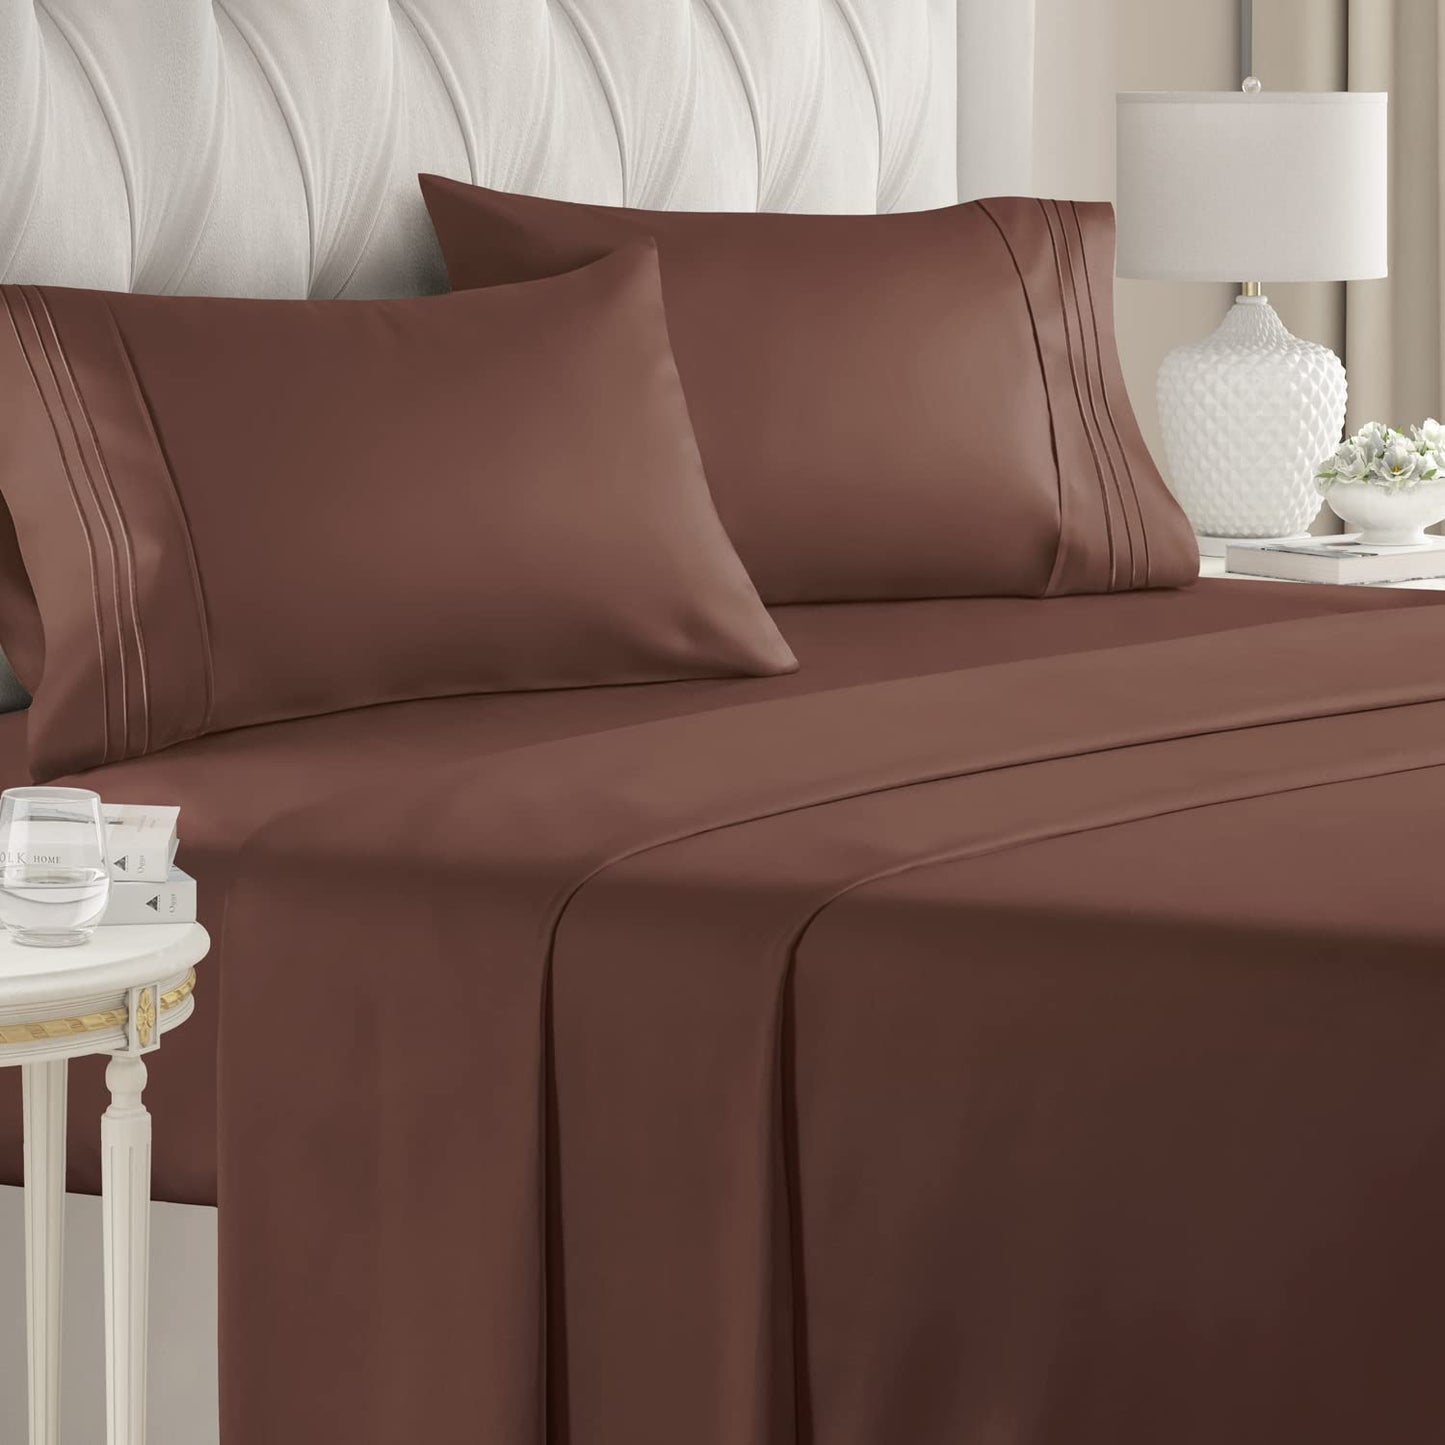 Buy Full Size Flat Sheet Chocolate Egyptian Cotton 1000 Thread Count at- Egyptianhomelinens.com